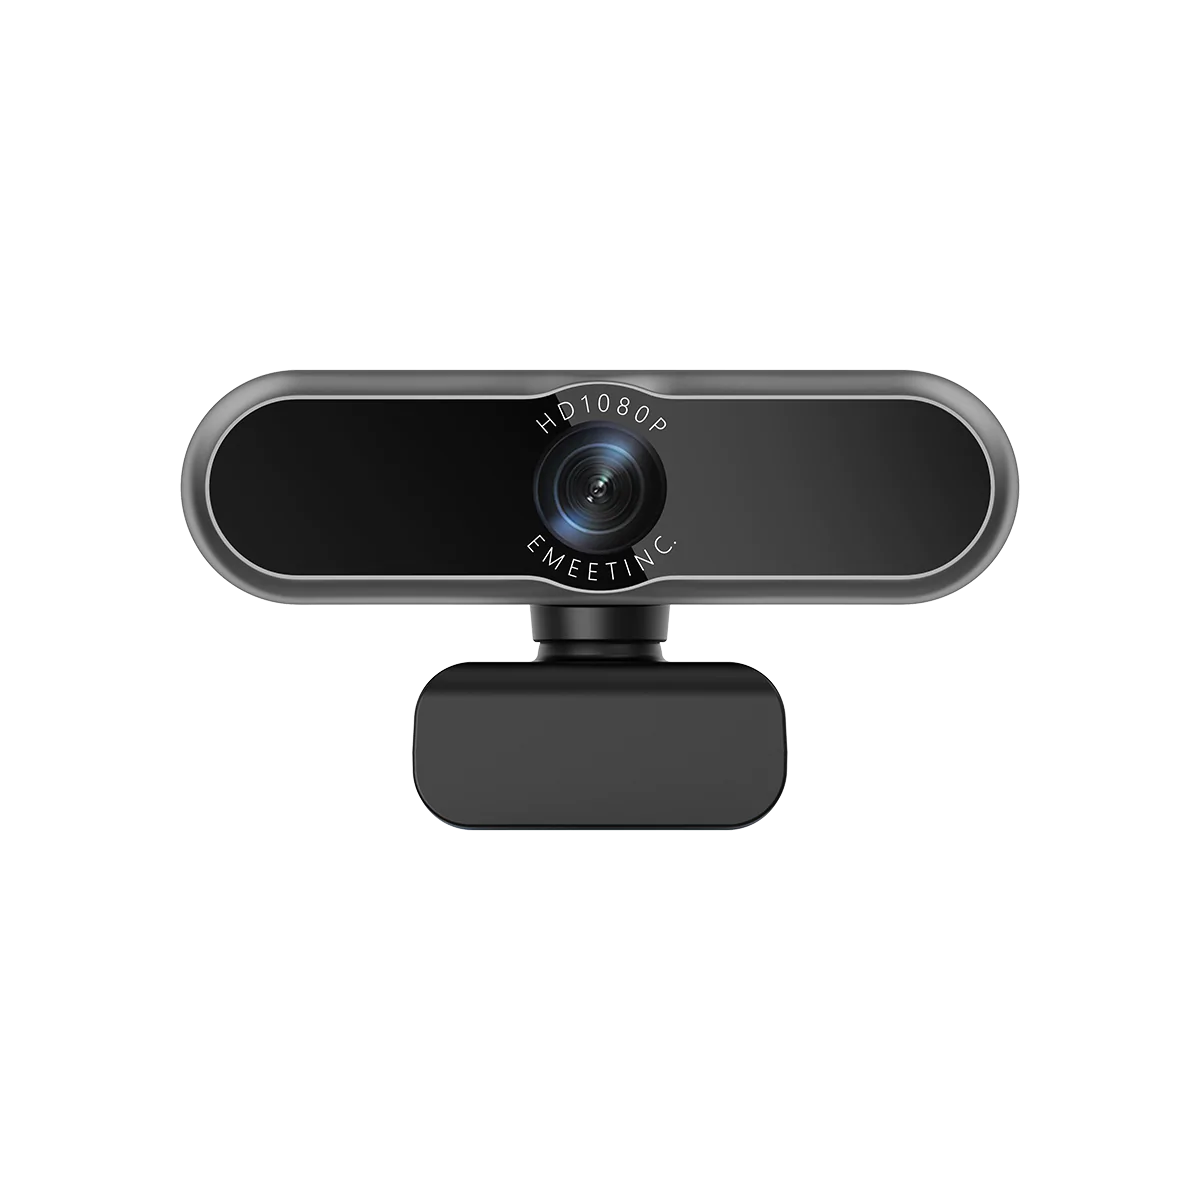 Webcam 1080P@60pfs/30fps immersive streaming experience